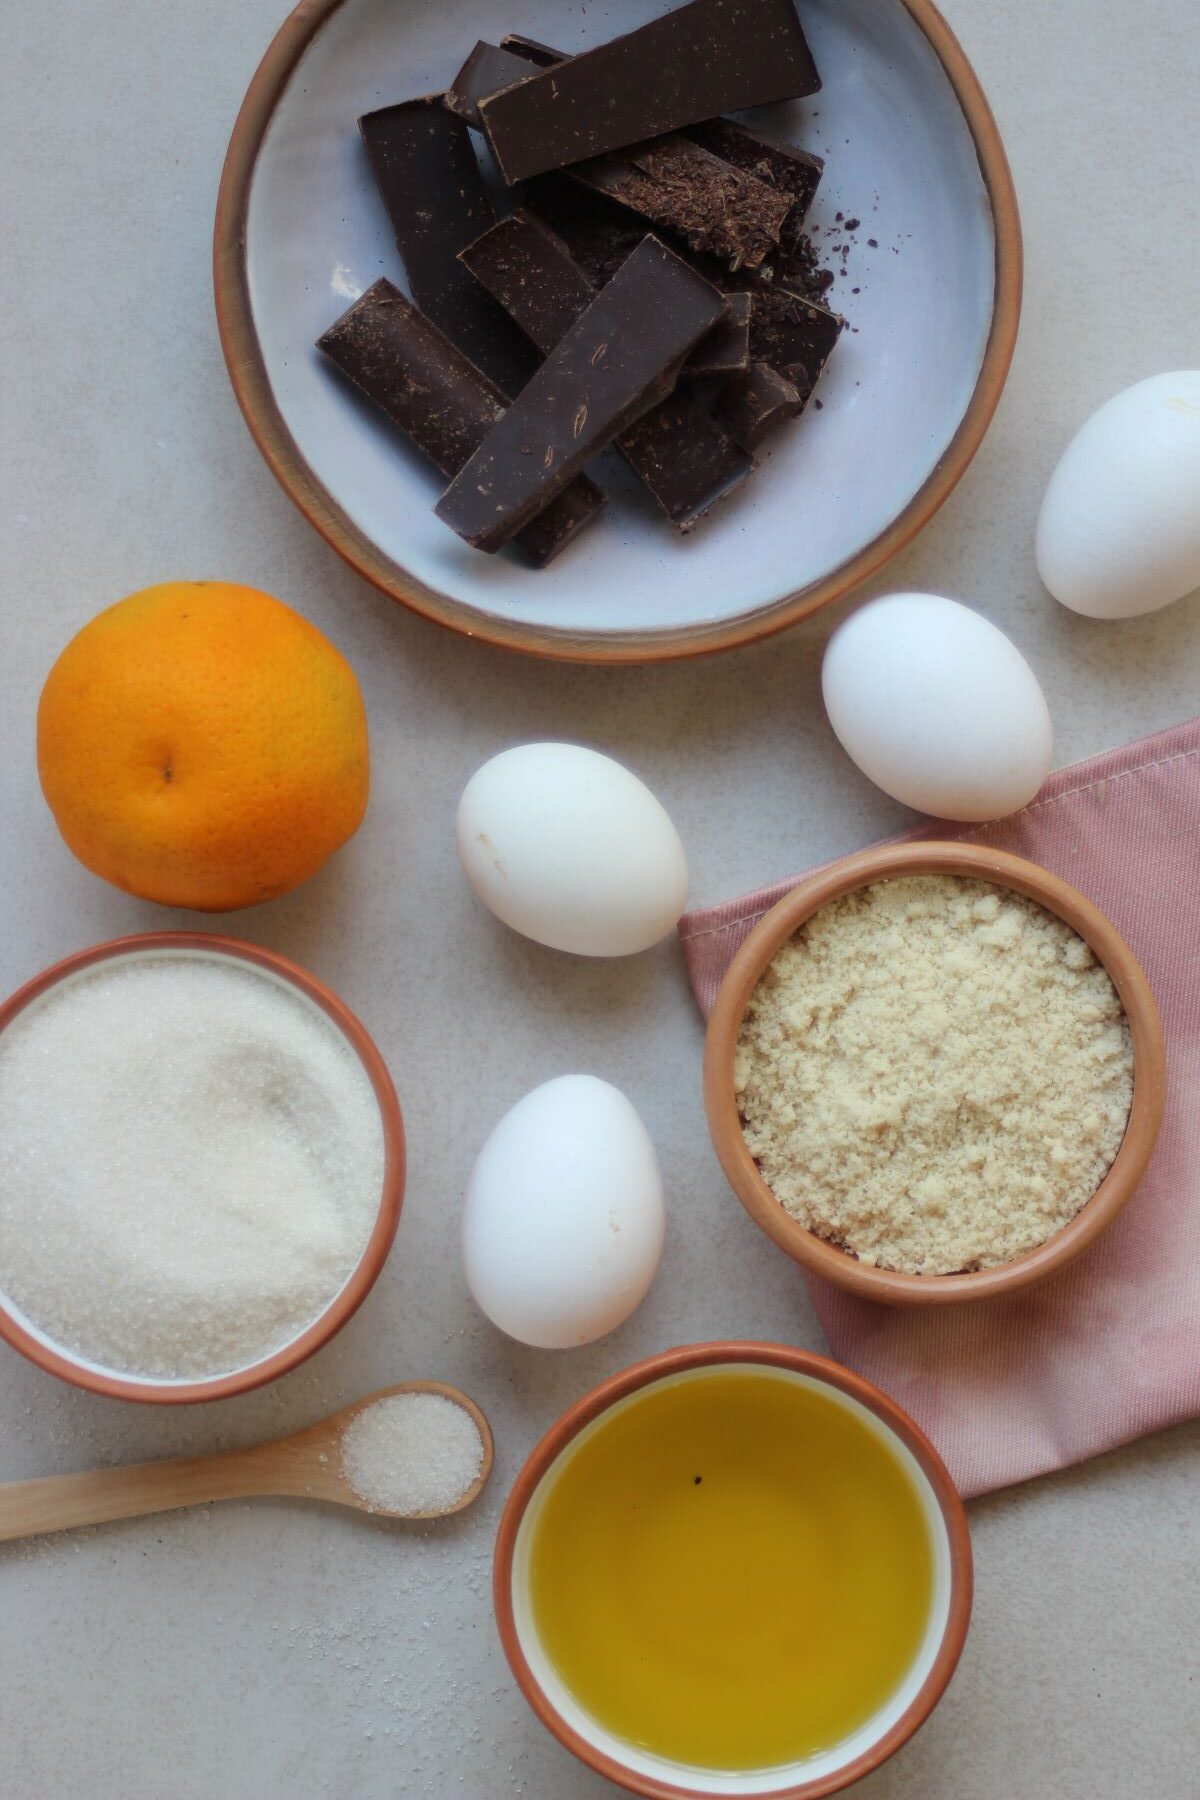 Chocolate orange cake ingredients seen from above.